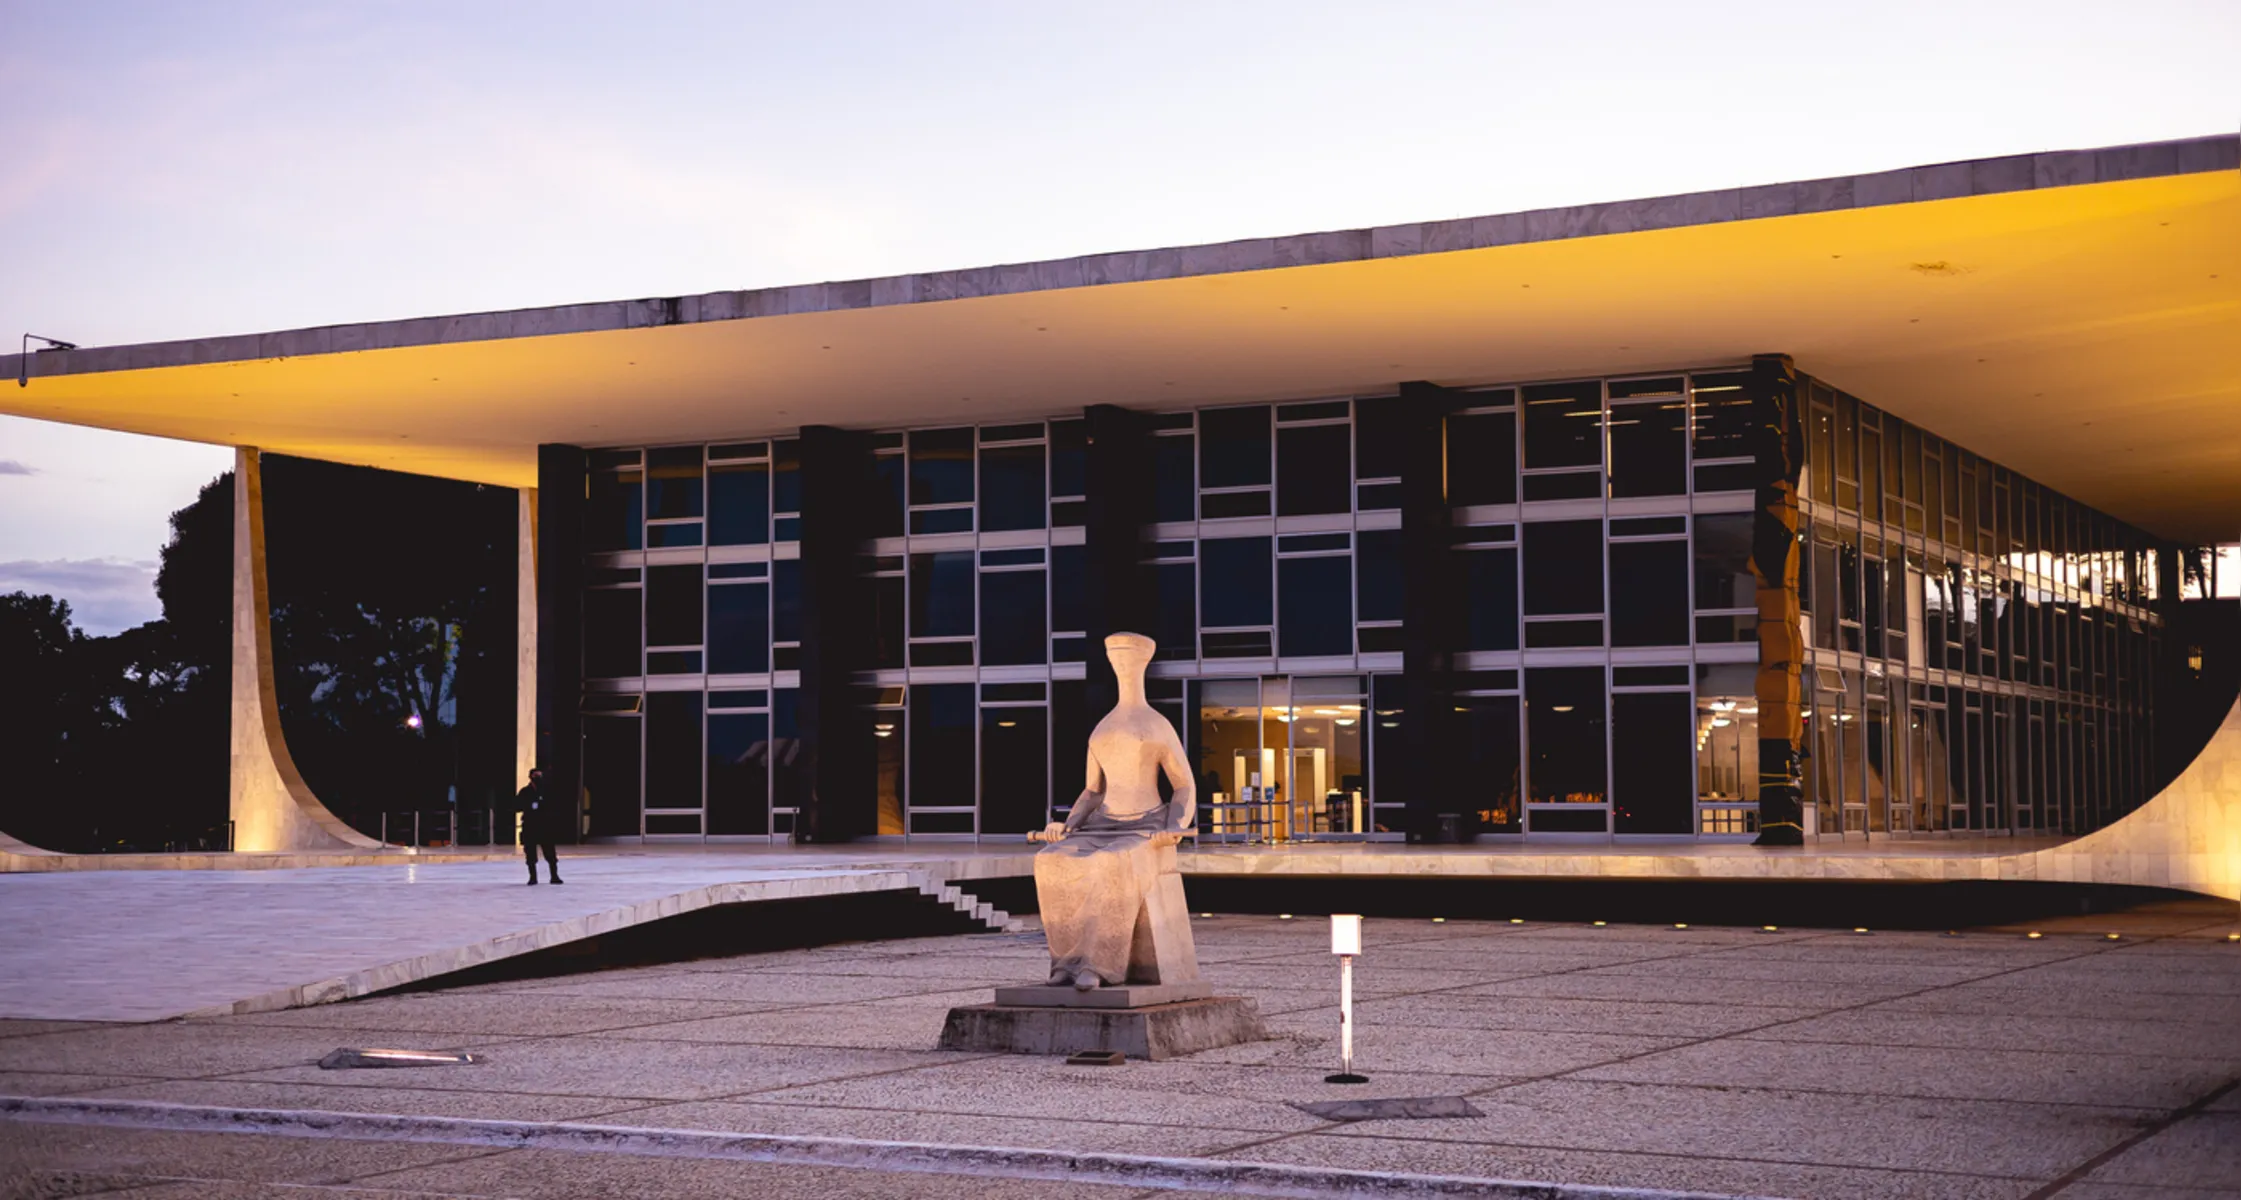 Photograph of the Federal Supreme Court ( STF - Supremo Tribunal Federal )  in Brasilia, federal capital of Brazil. The STF was designed by Oscar Niemeyer and a sculpture of justice by the artist Alfredo Ceschiatti. Brasilia, Federal District - Brazil. December, 04, 2021.